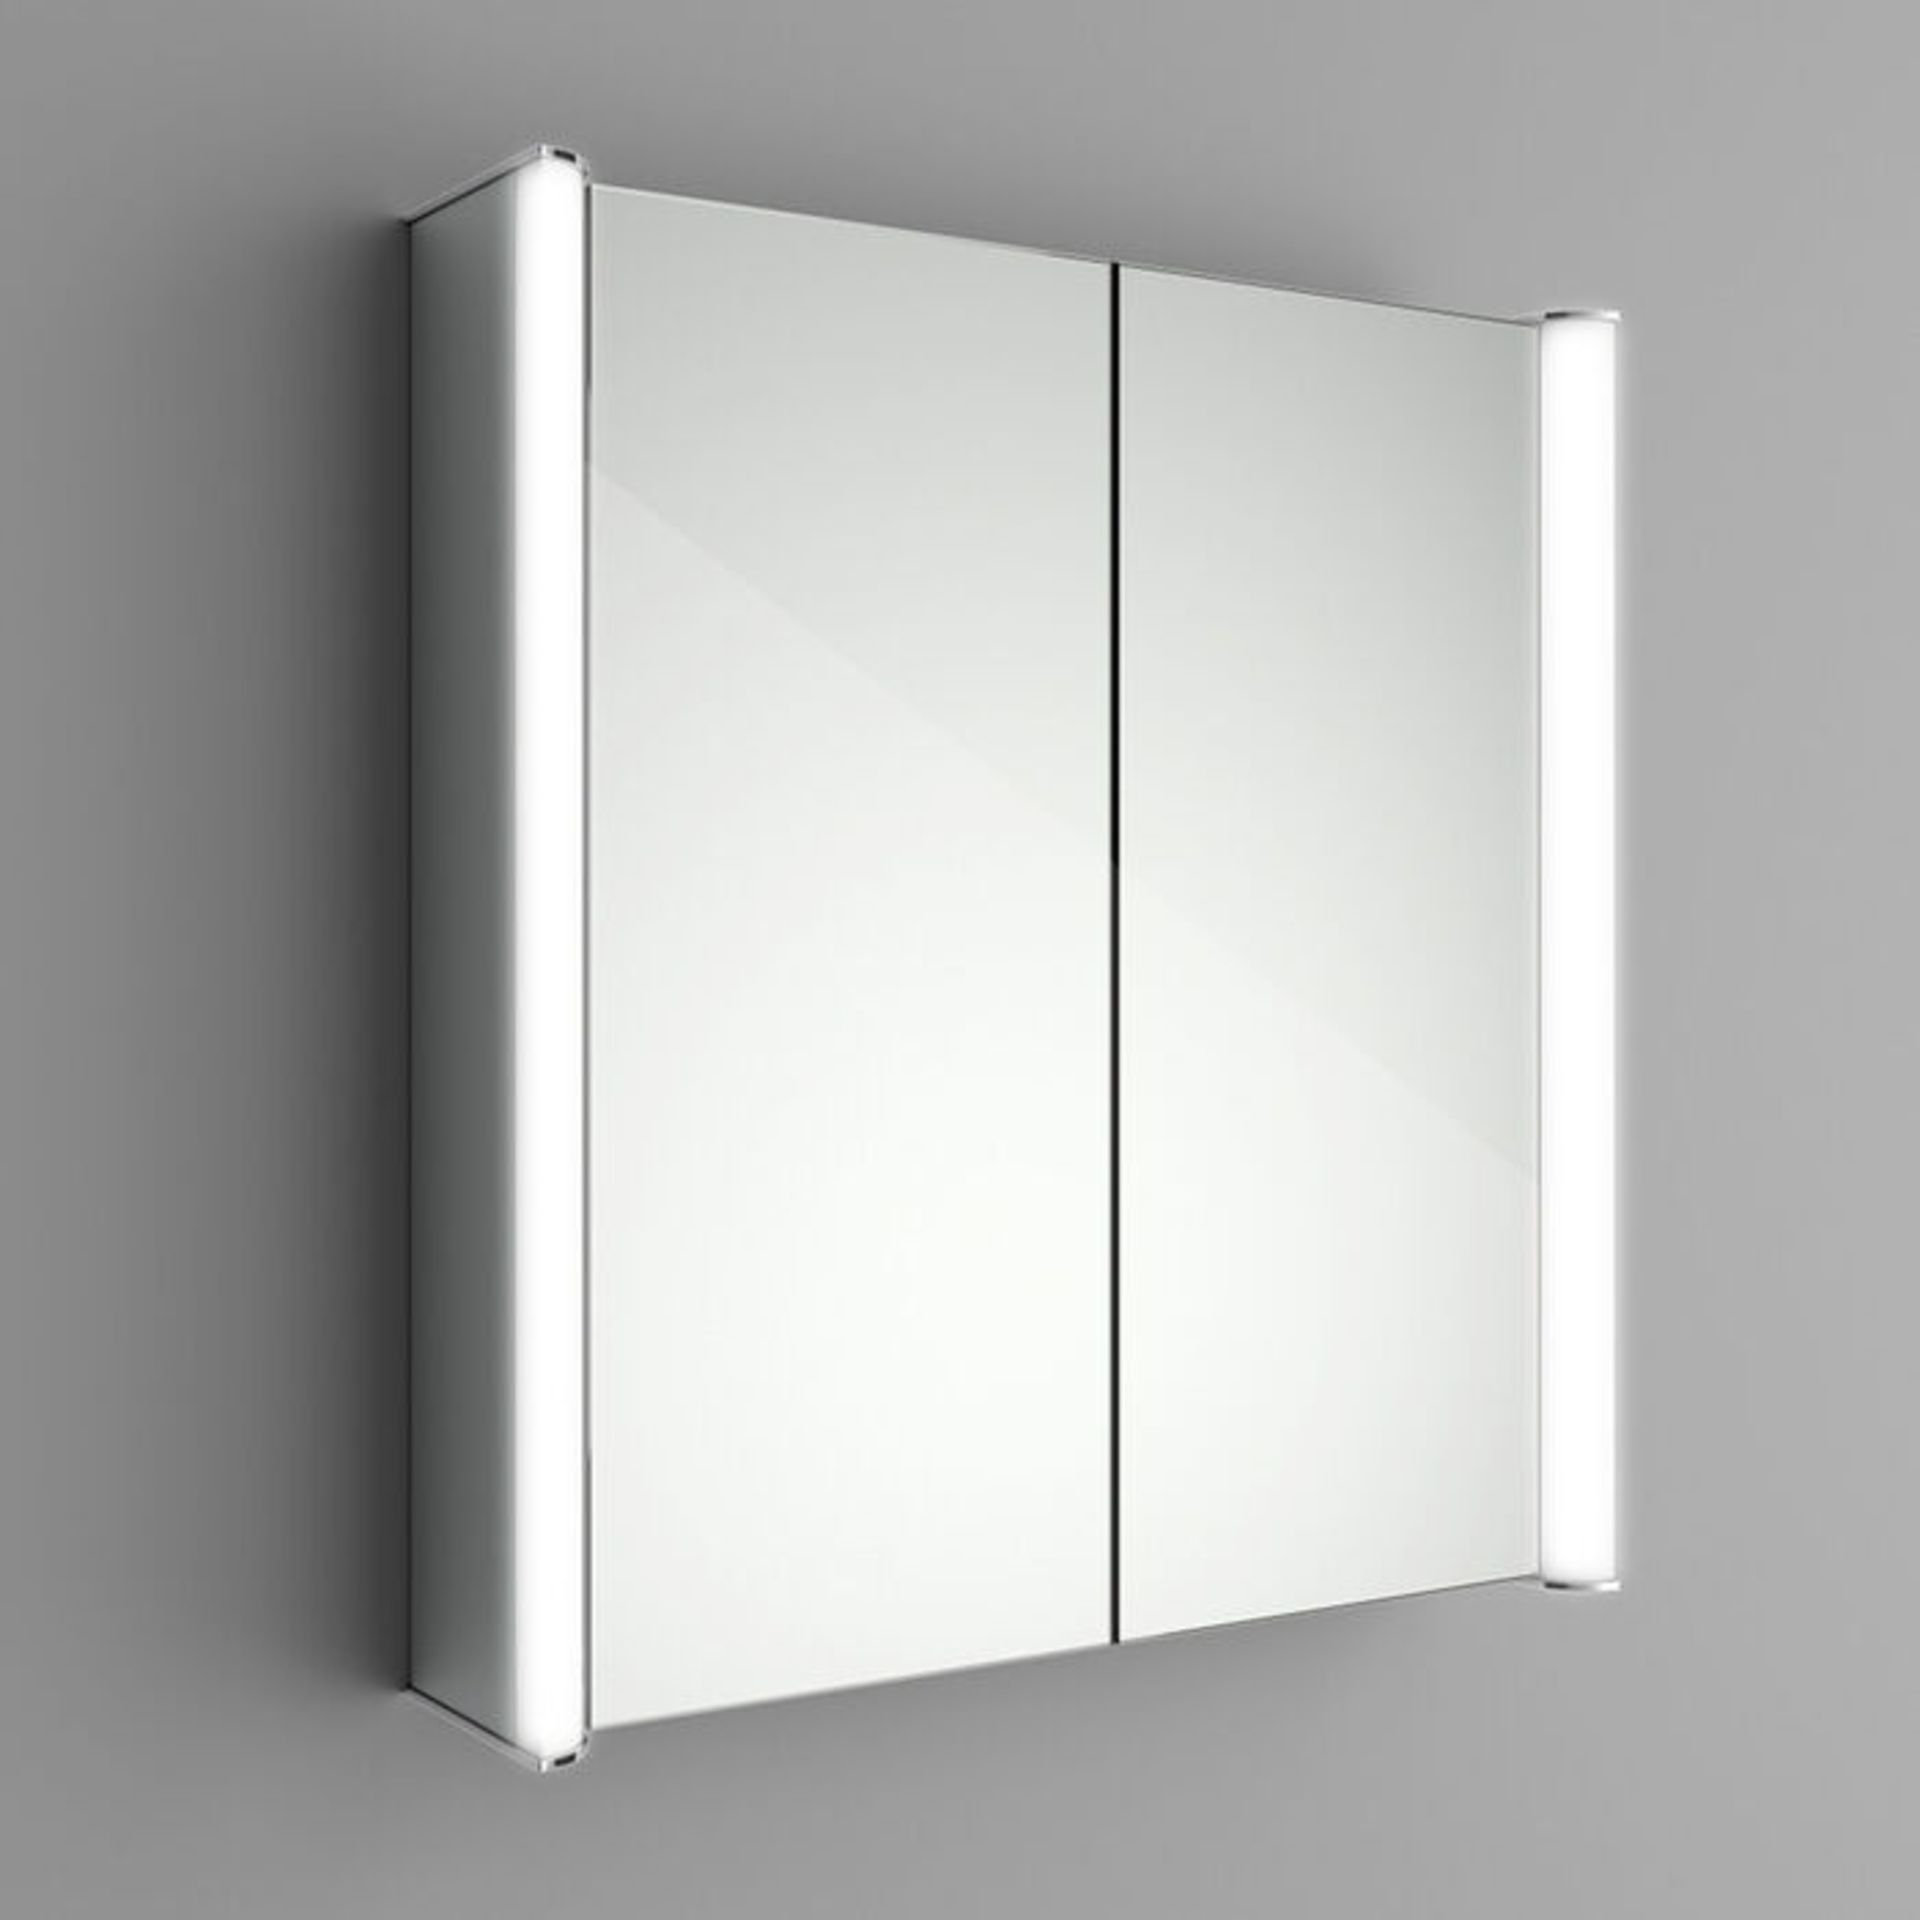 (DD30) 600x650mm Bloom Illuminated LED Mirror Cabinet - Shaver Socket. Rrp £499.99. Double Sid... - Image 4 of 4